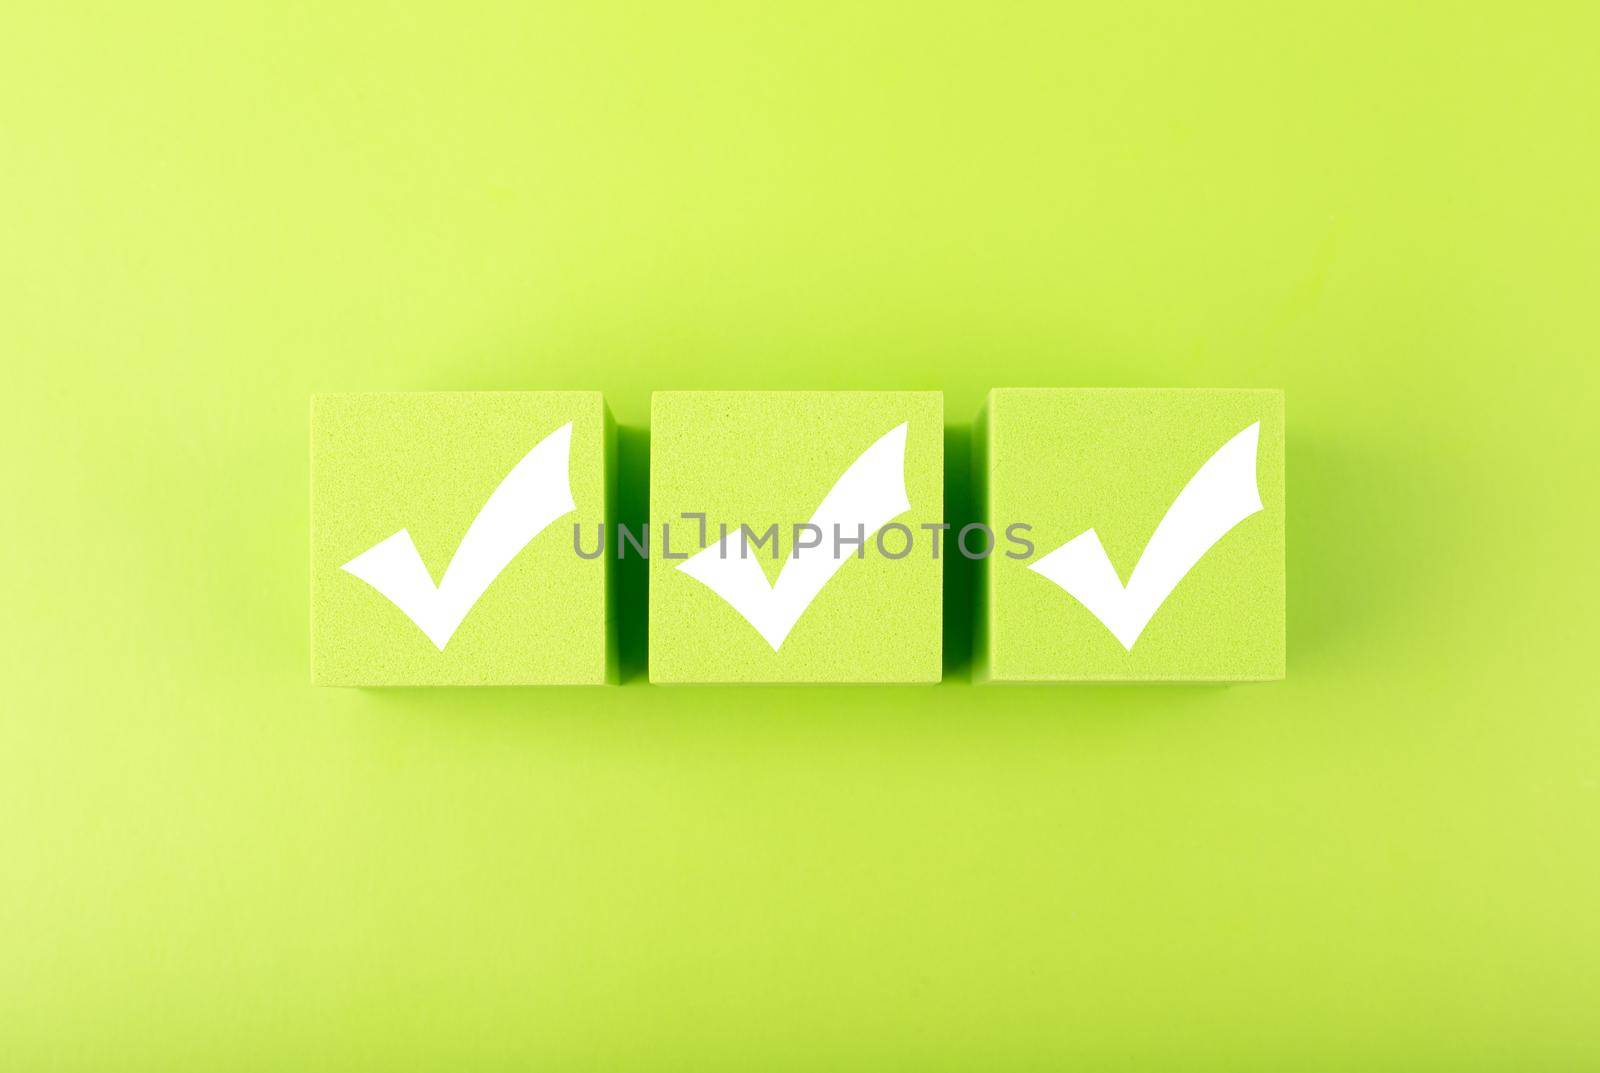 Three white checkmarks on green toy cubes on bright background. Concept of questionary, checklist, to do list, planning, business or verification.